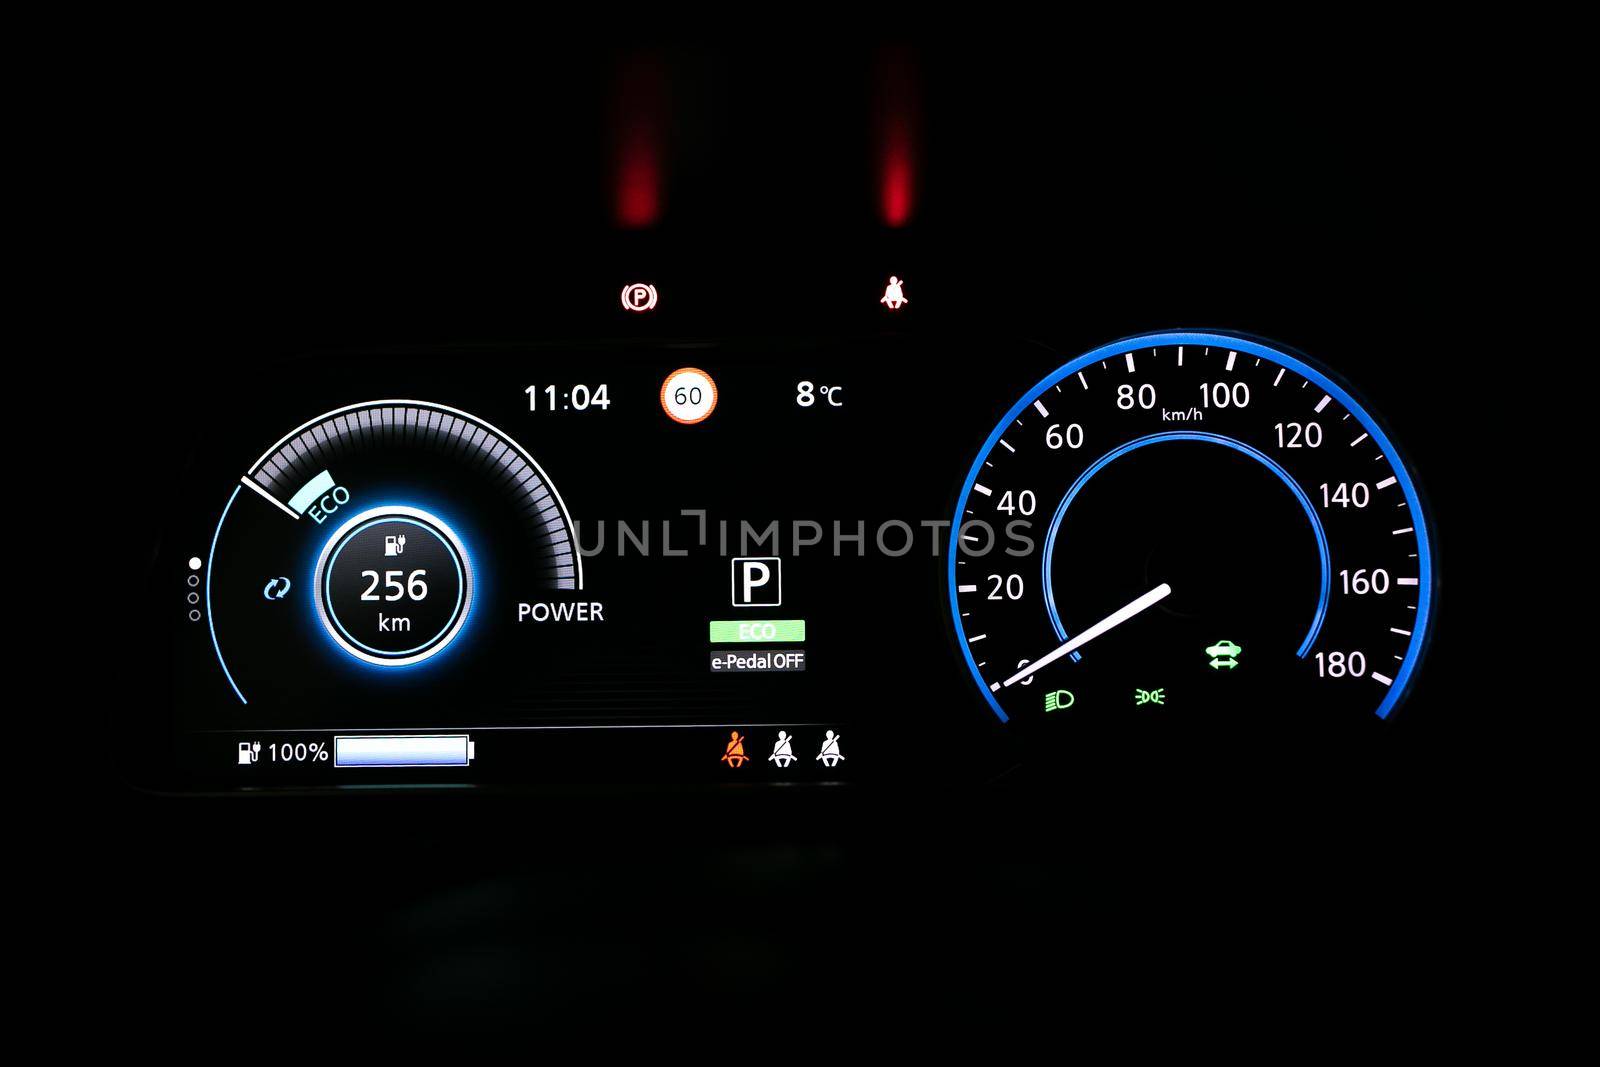 Starting electric car Dashboard. Track in to the button. Finger press the button to start the car engine. Car dashboard during start engine on the darkness. Electric car dashboard with backlight